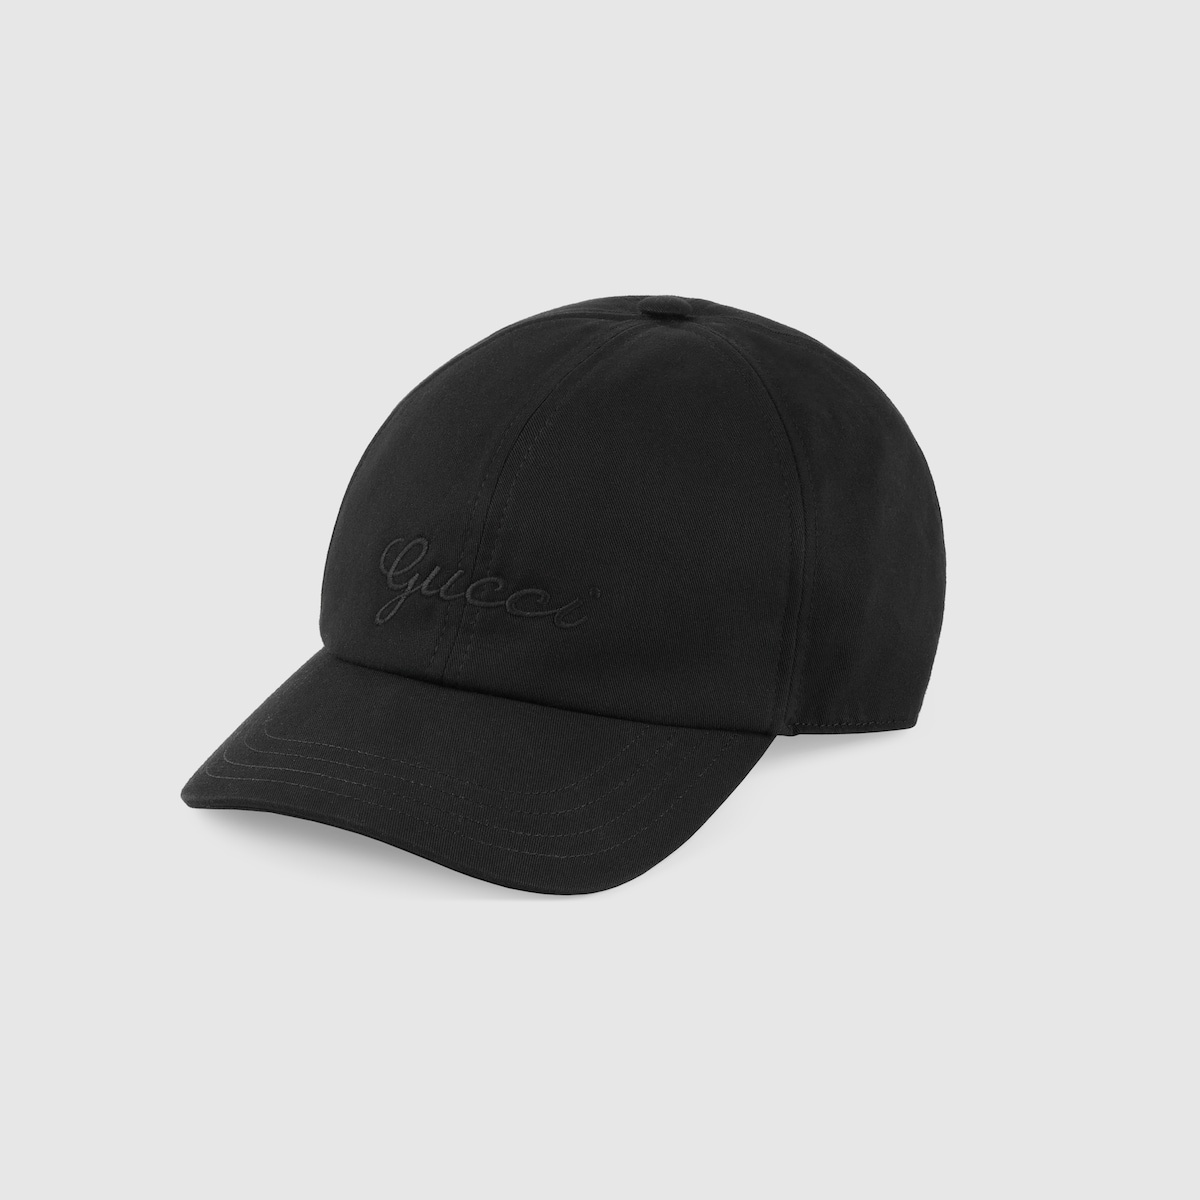 Cotton baseball hat with embroidery - 1